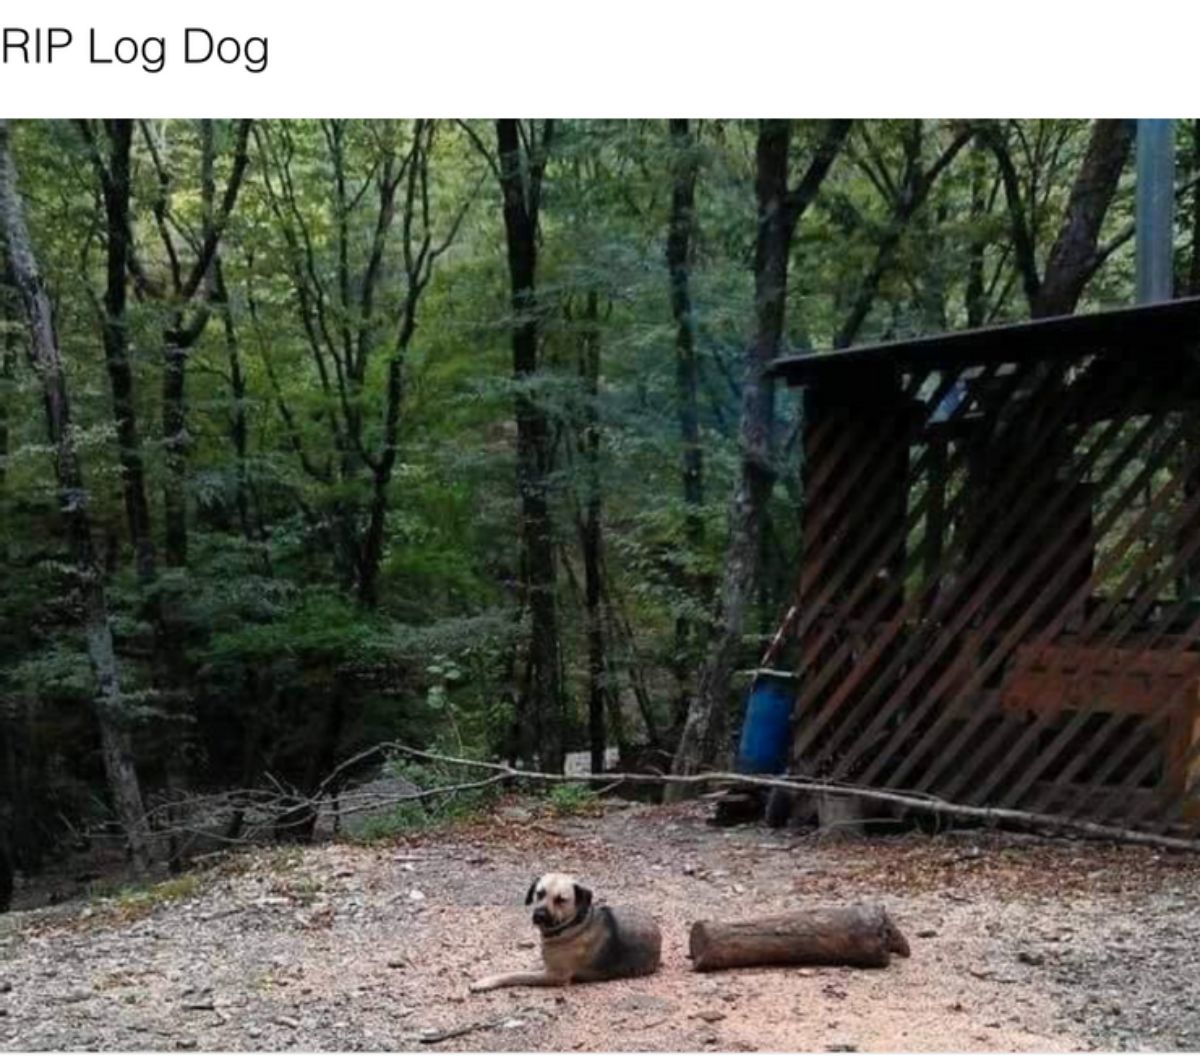 brown dog laying on the ground next to a log looking like it's been cut in half